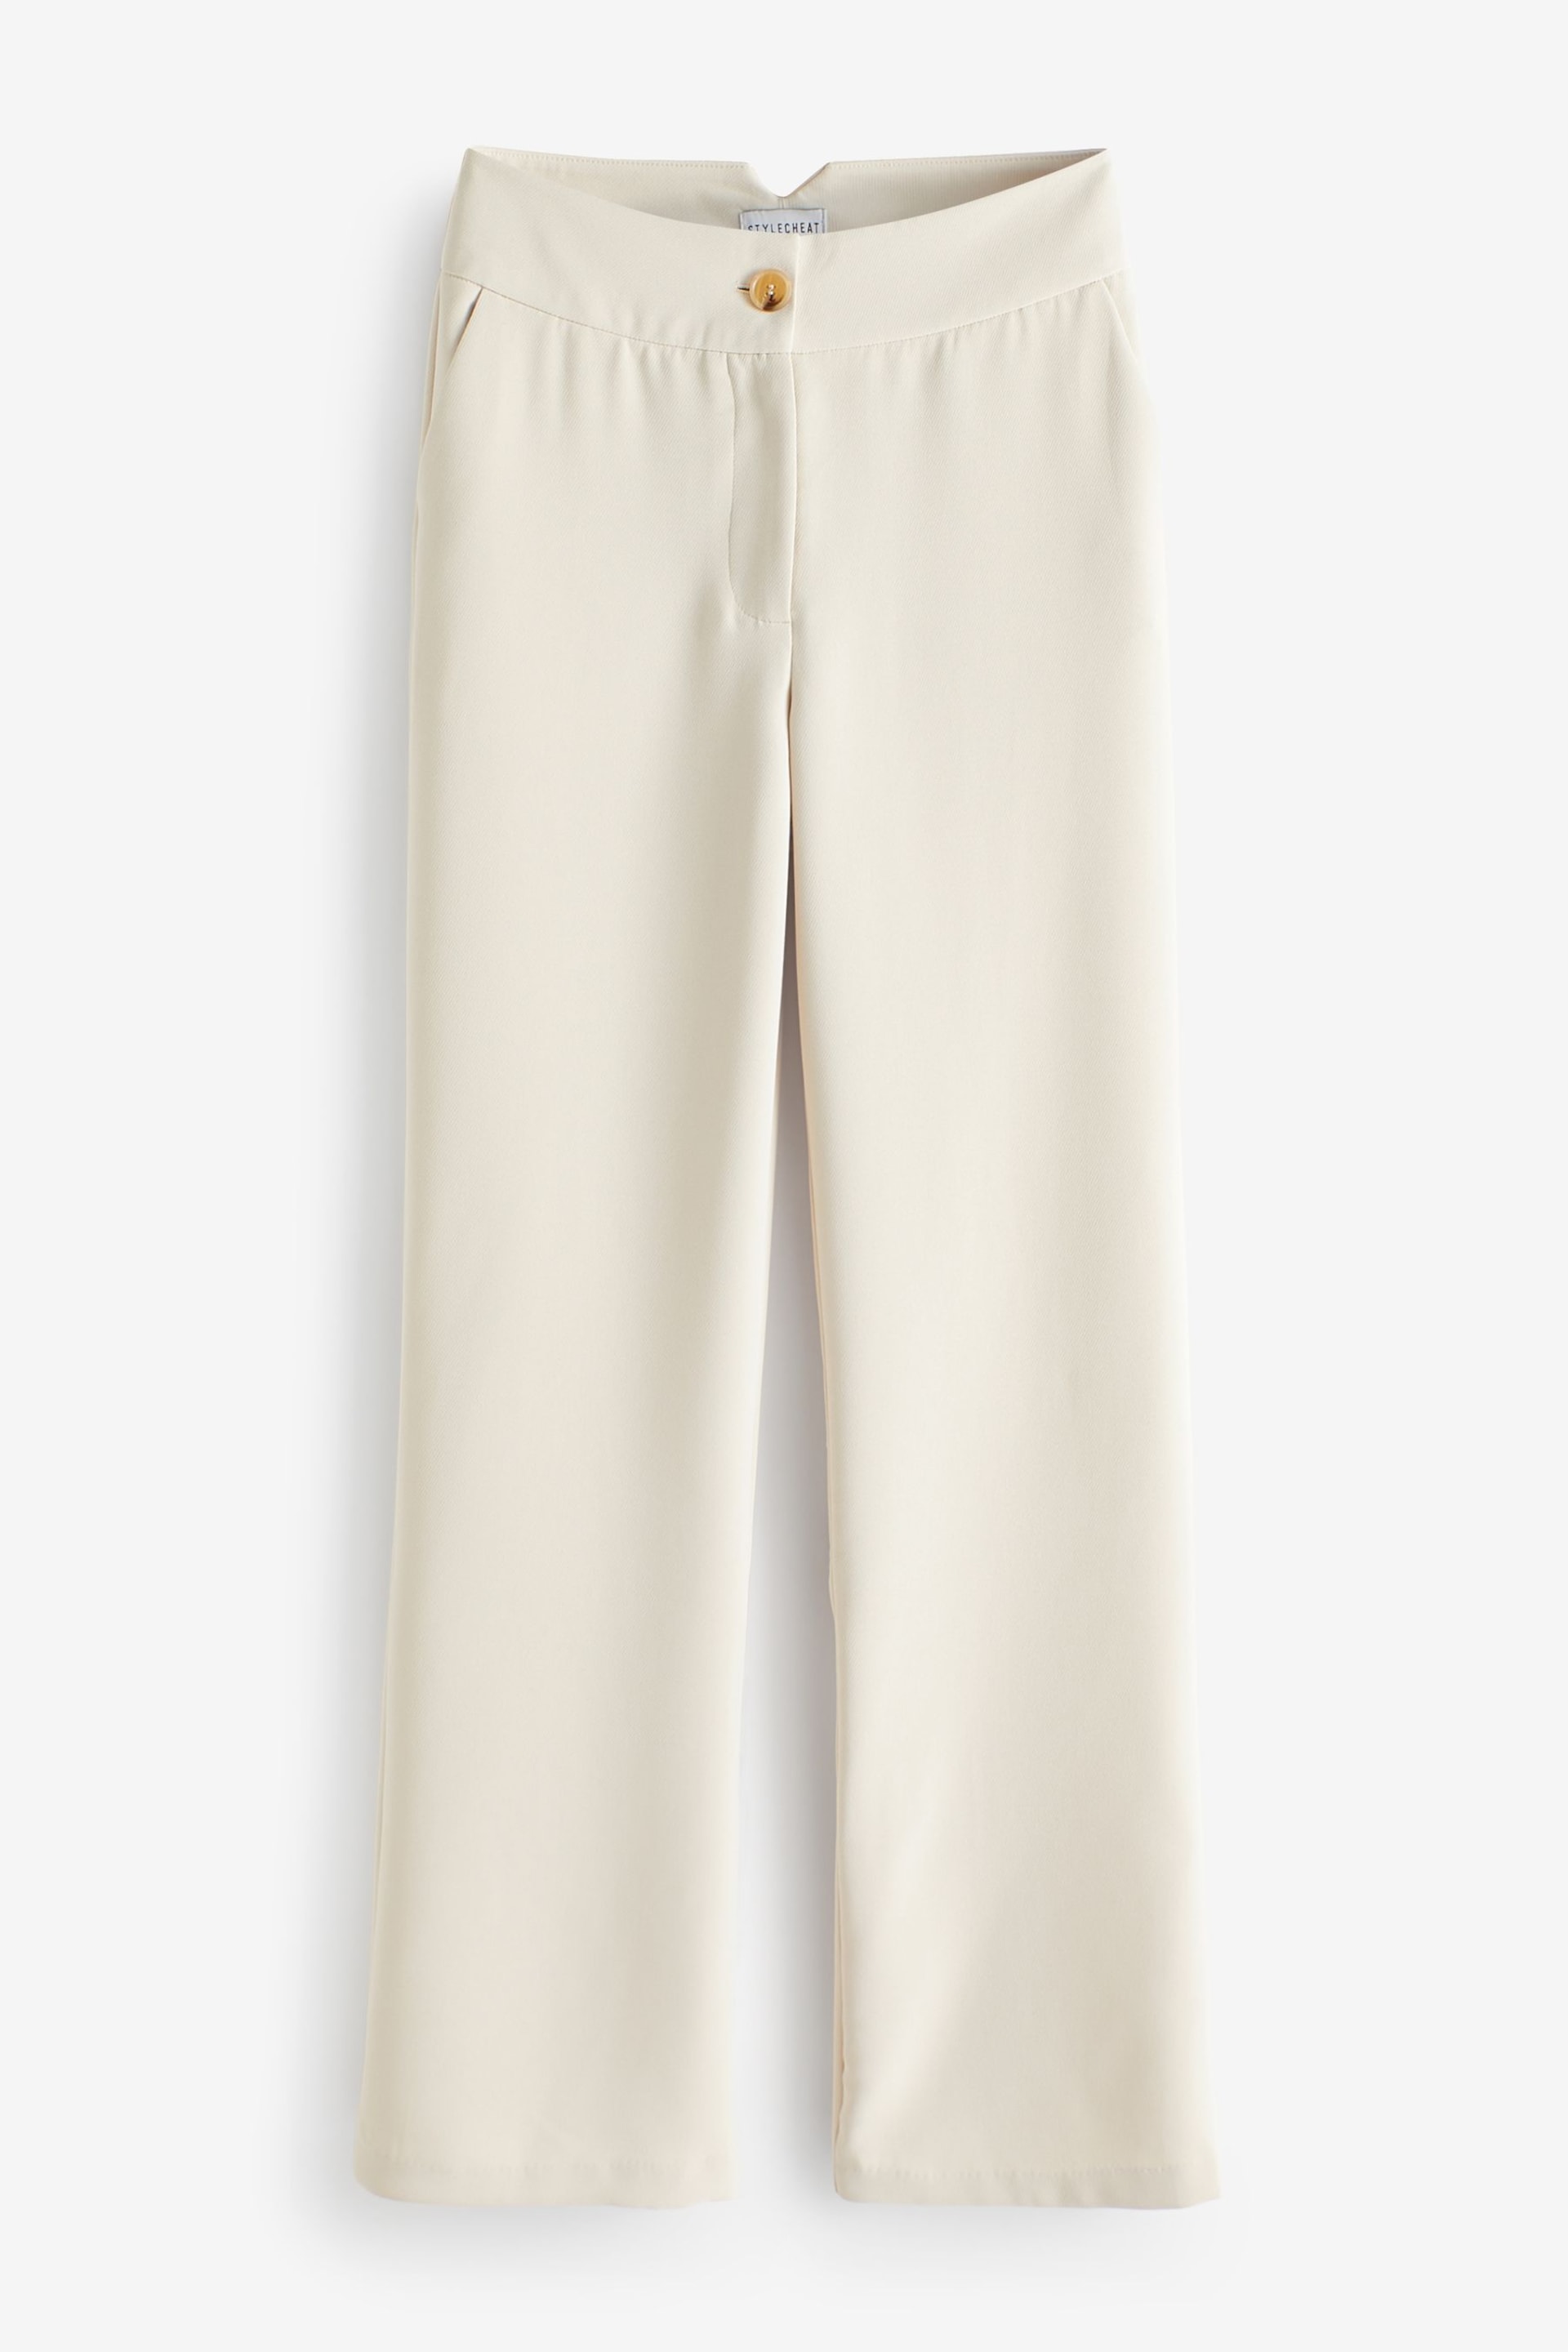 Style Cheat Natural Lyra Straight Leg Trousers - Image 5 of 5